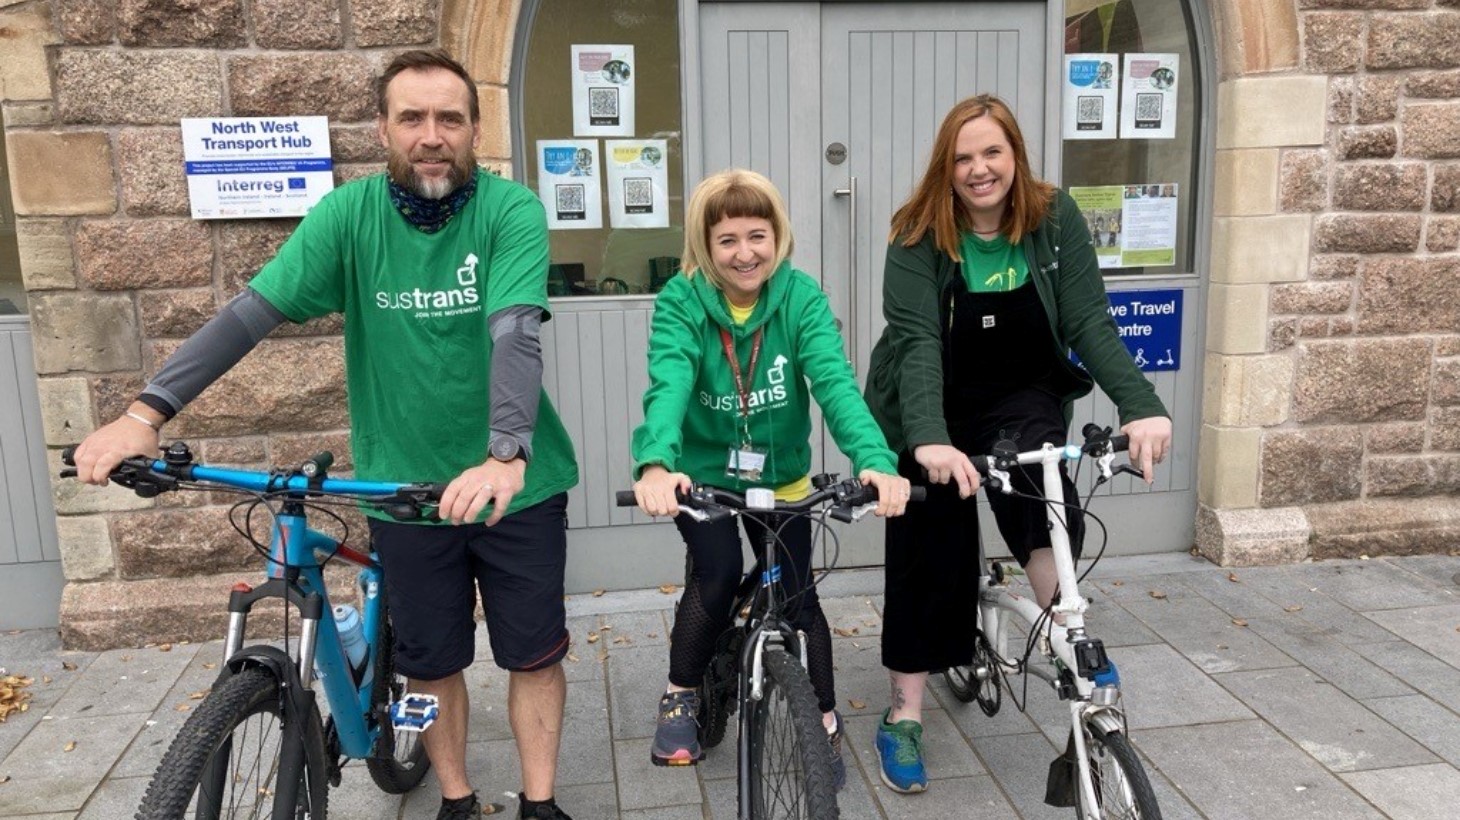 A man and two women stand with bikes outside an active travel centre wearing green Sustrans branded clothing.